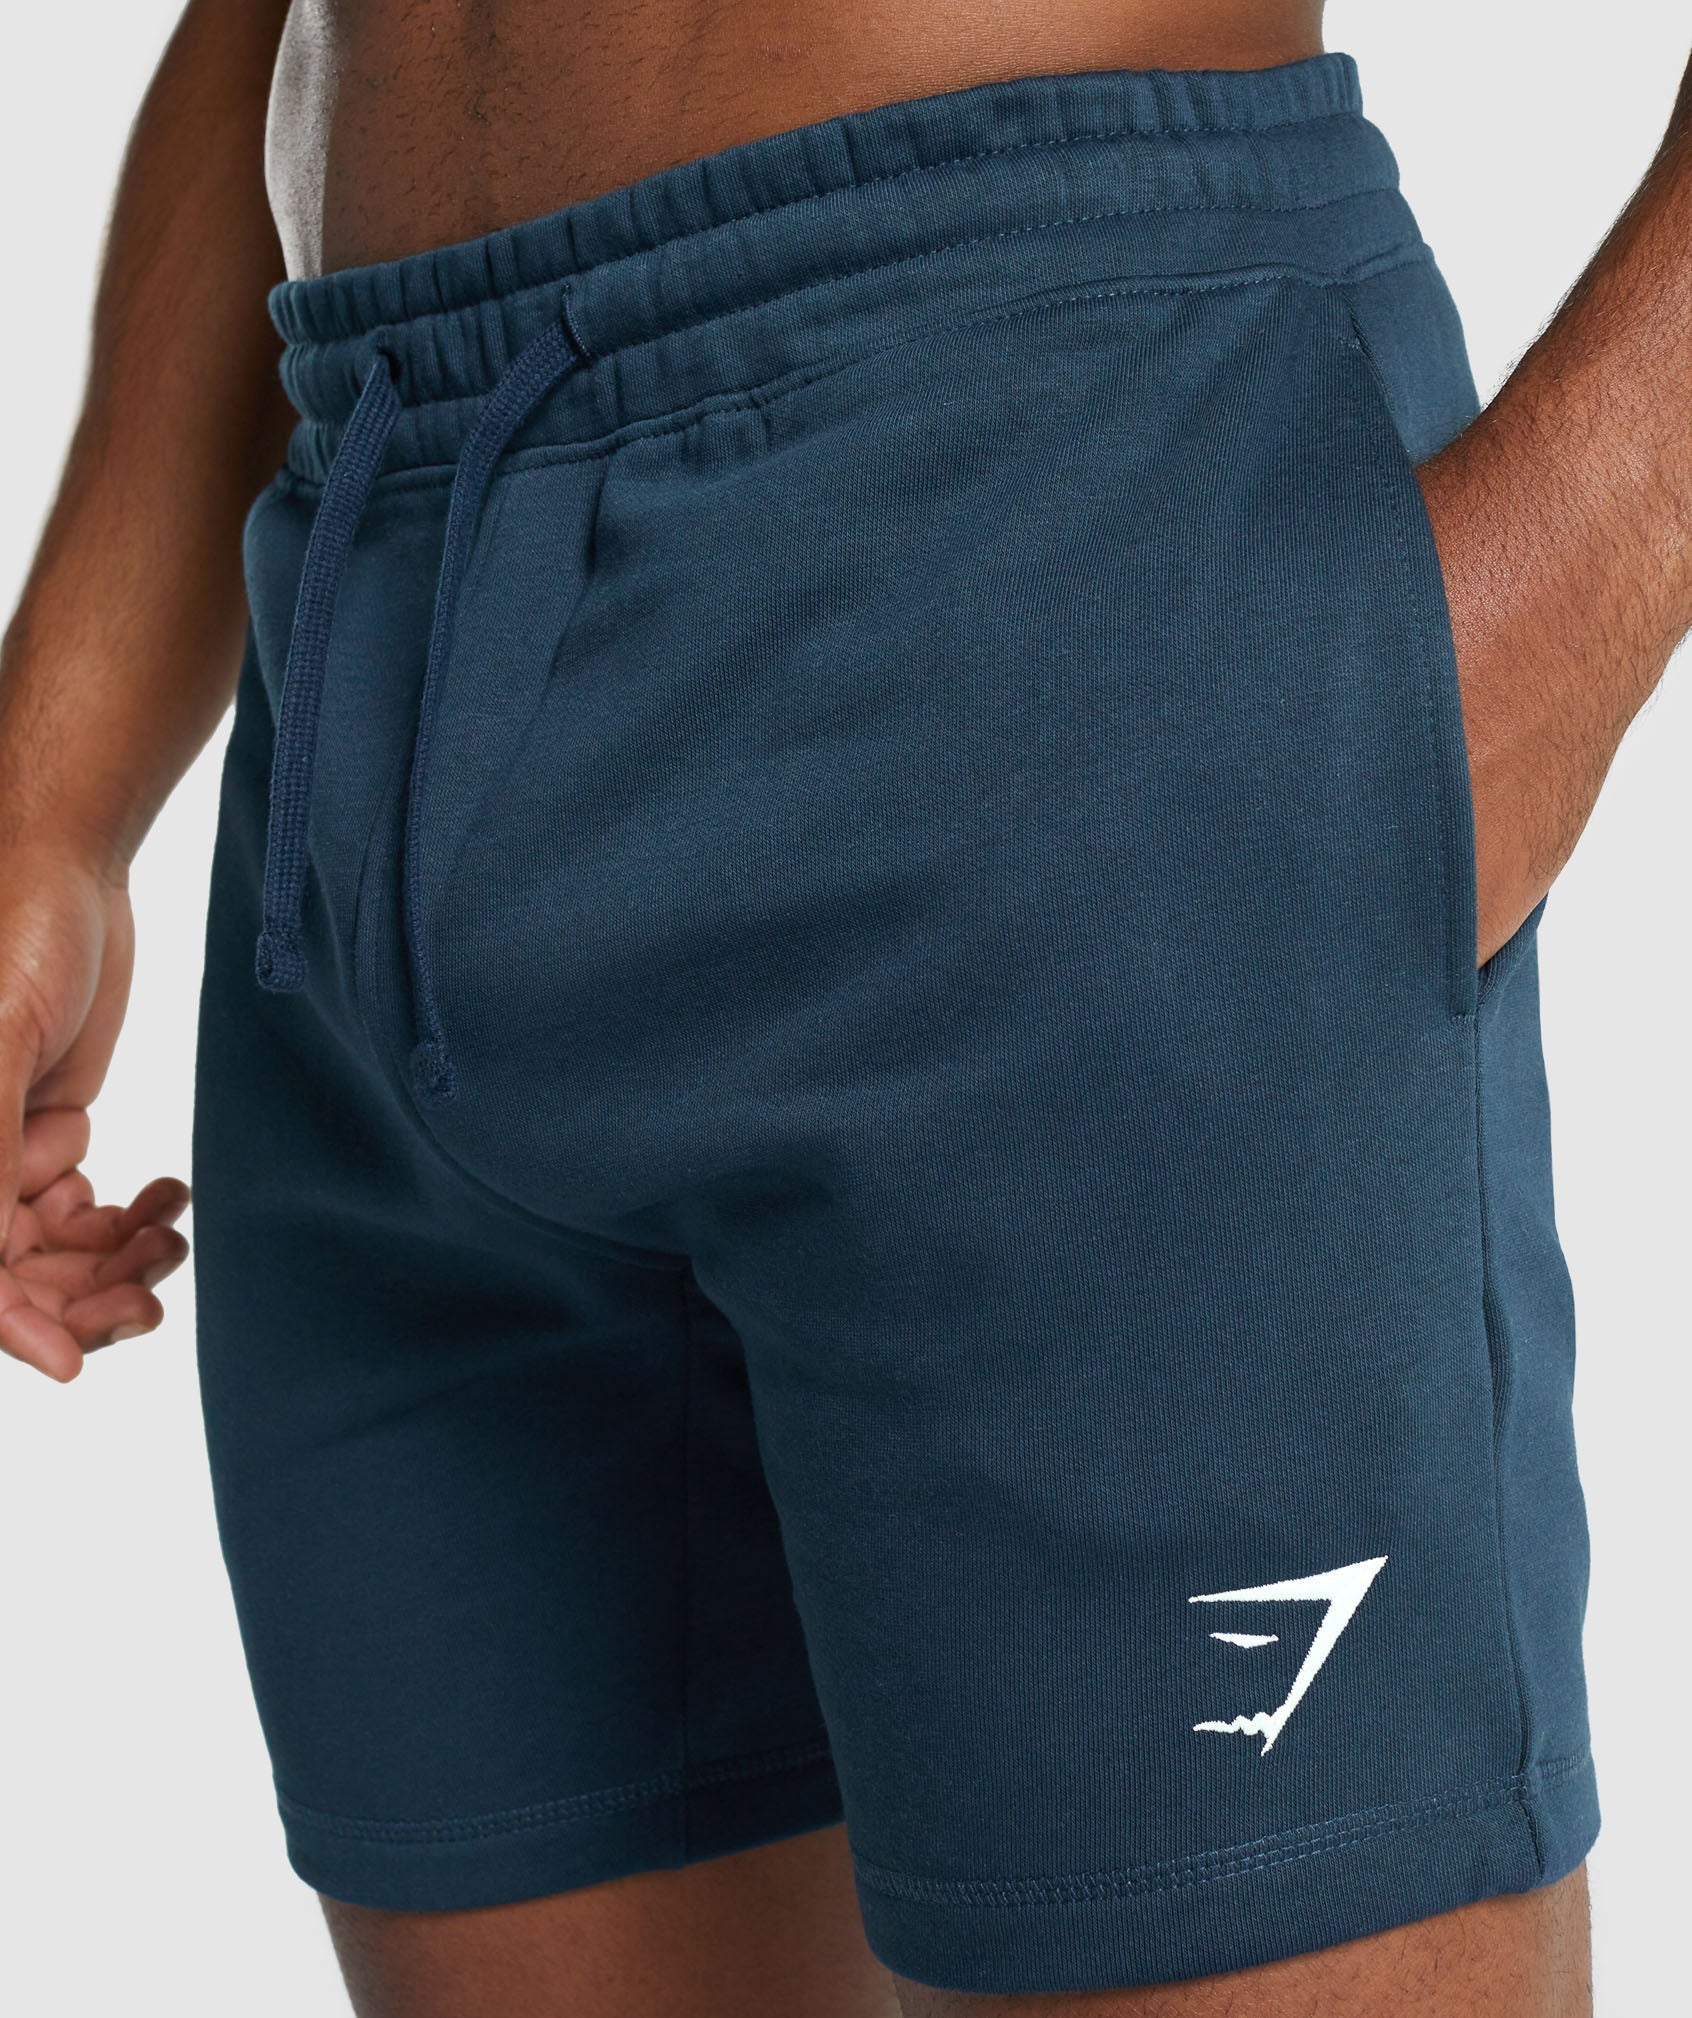 Gymshark Crest 7” inseam shorts. Perfect shorts for us short kings